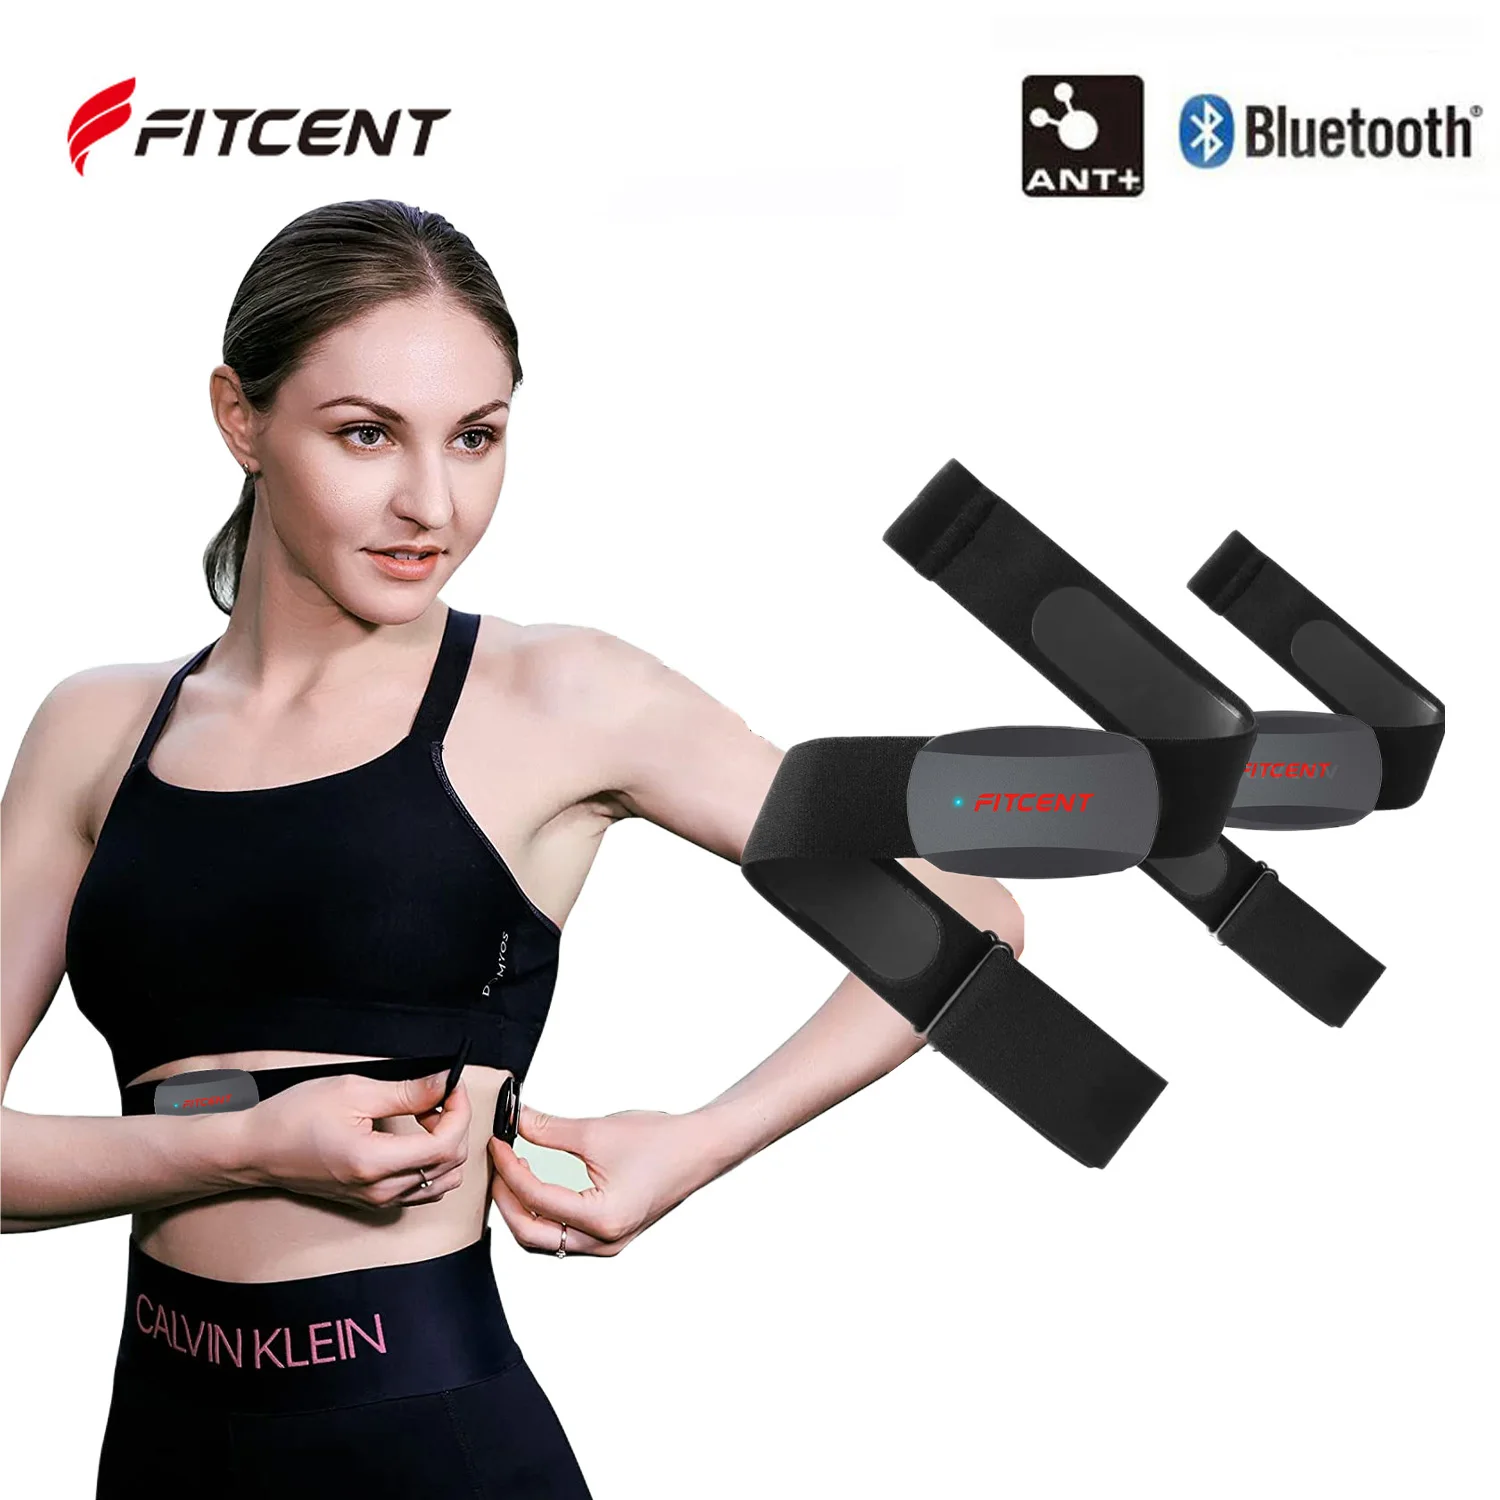 

FITCENT 2Pcs Heart Rate Monitor Chest Strap ANT+ Bluetooth Dual HRM for Zwift DDP Yoga Strava Polar Wahoo Garmin Watches